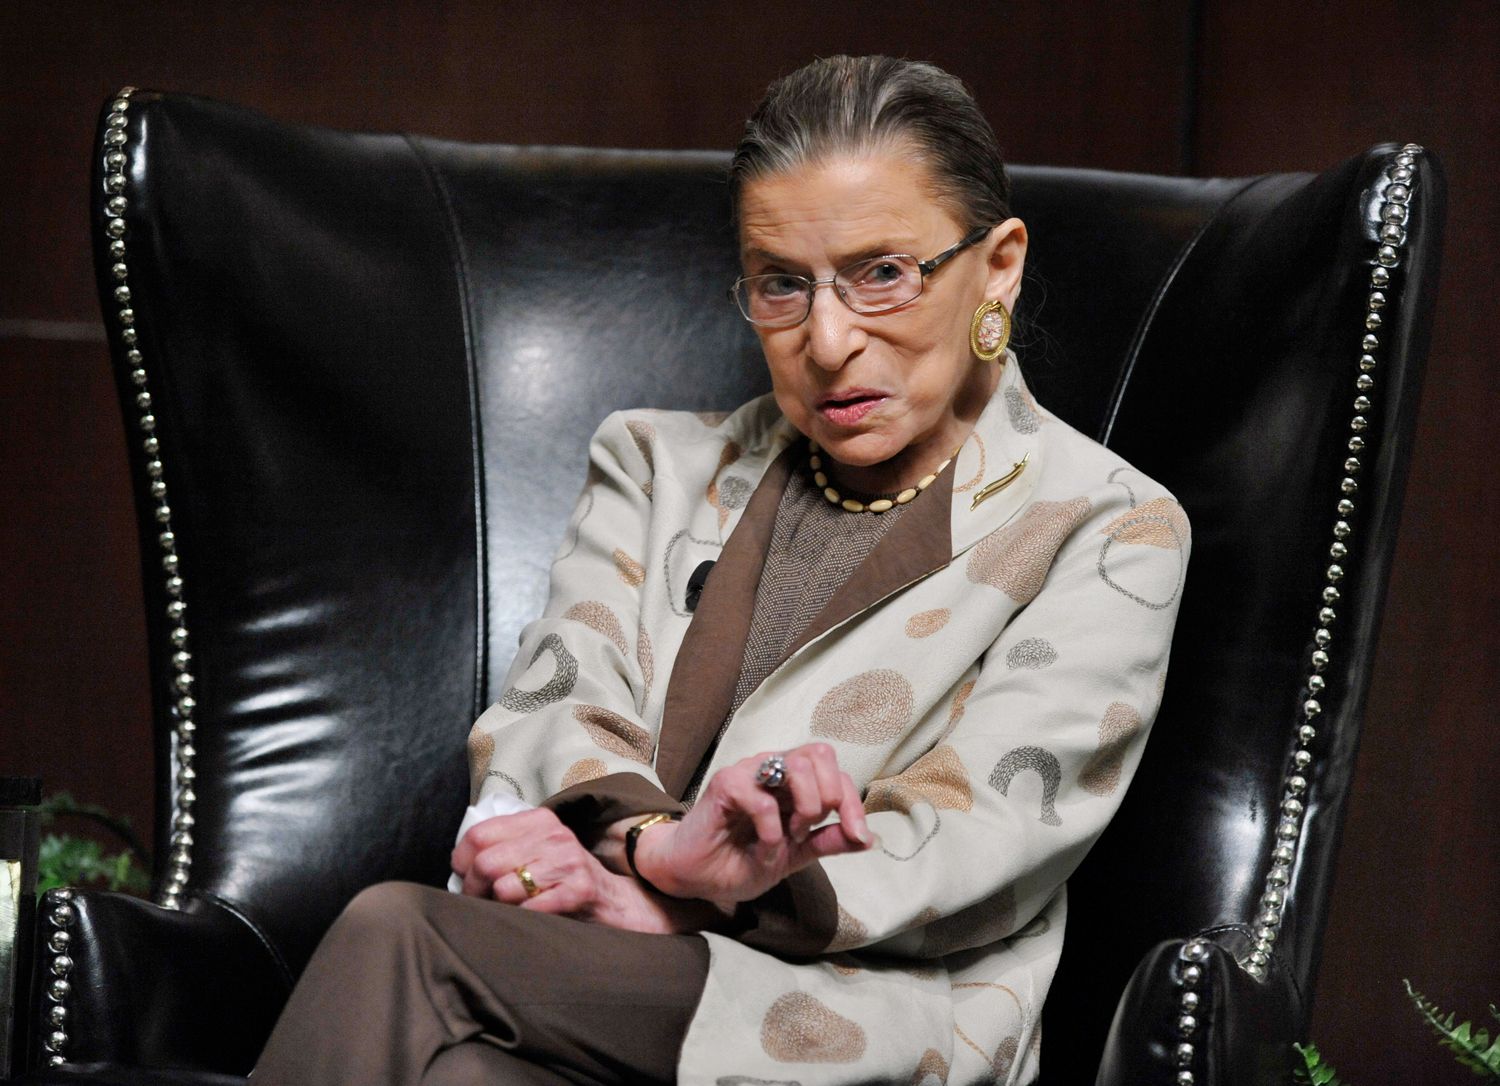 On RBG, and a Final Frontier for Equal Treatment